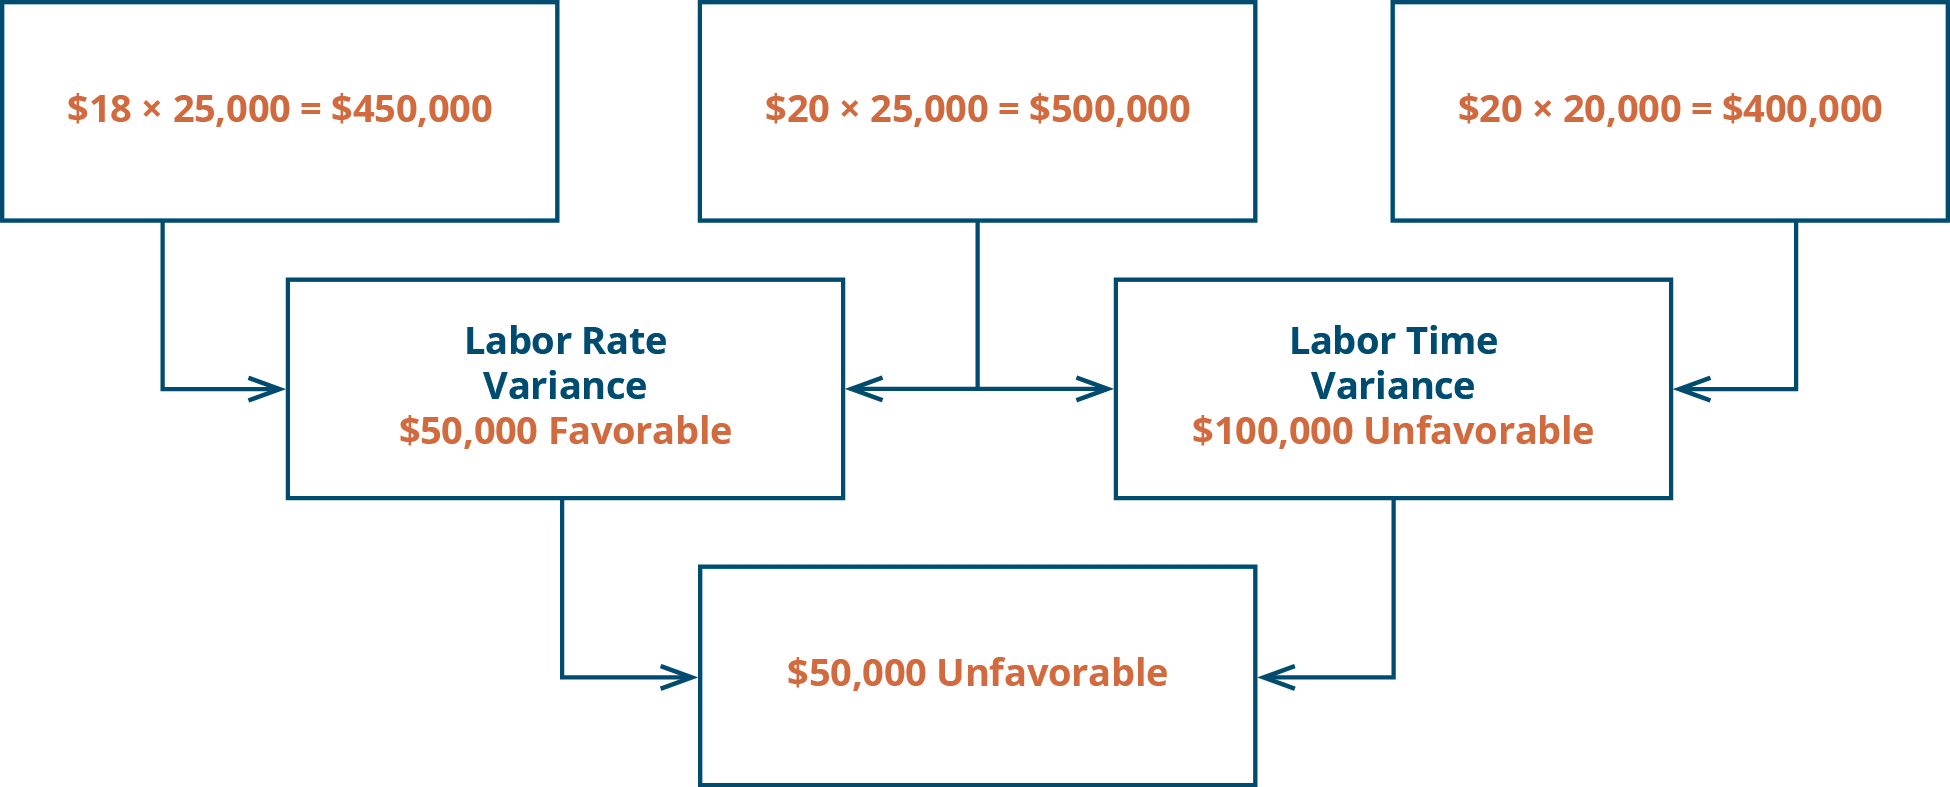 Labor Rate Variance $18 times 25,000 equals $450,000. $20 times 25,000 equals $500,000. $50,000 favorable. Plus: Labor Quantity Variance $20 times 25,000 equals $500,000. $20 times 20,000 equals $400,000. $100,000 unfavorable. Equals $50,000 unfavorable.